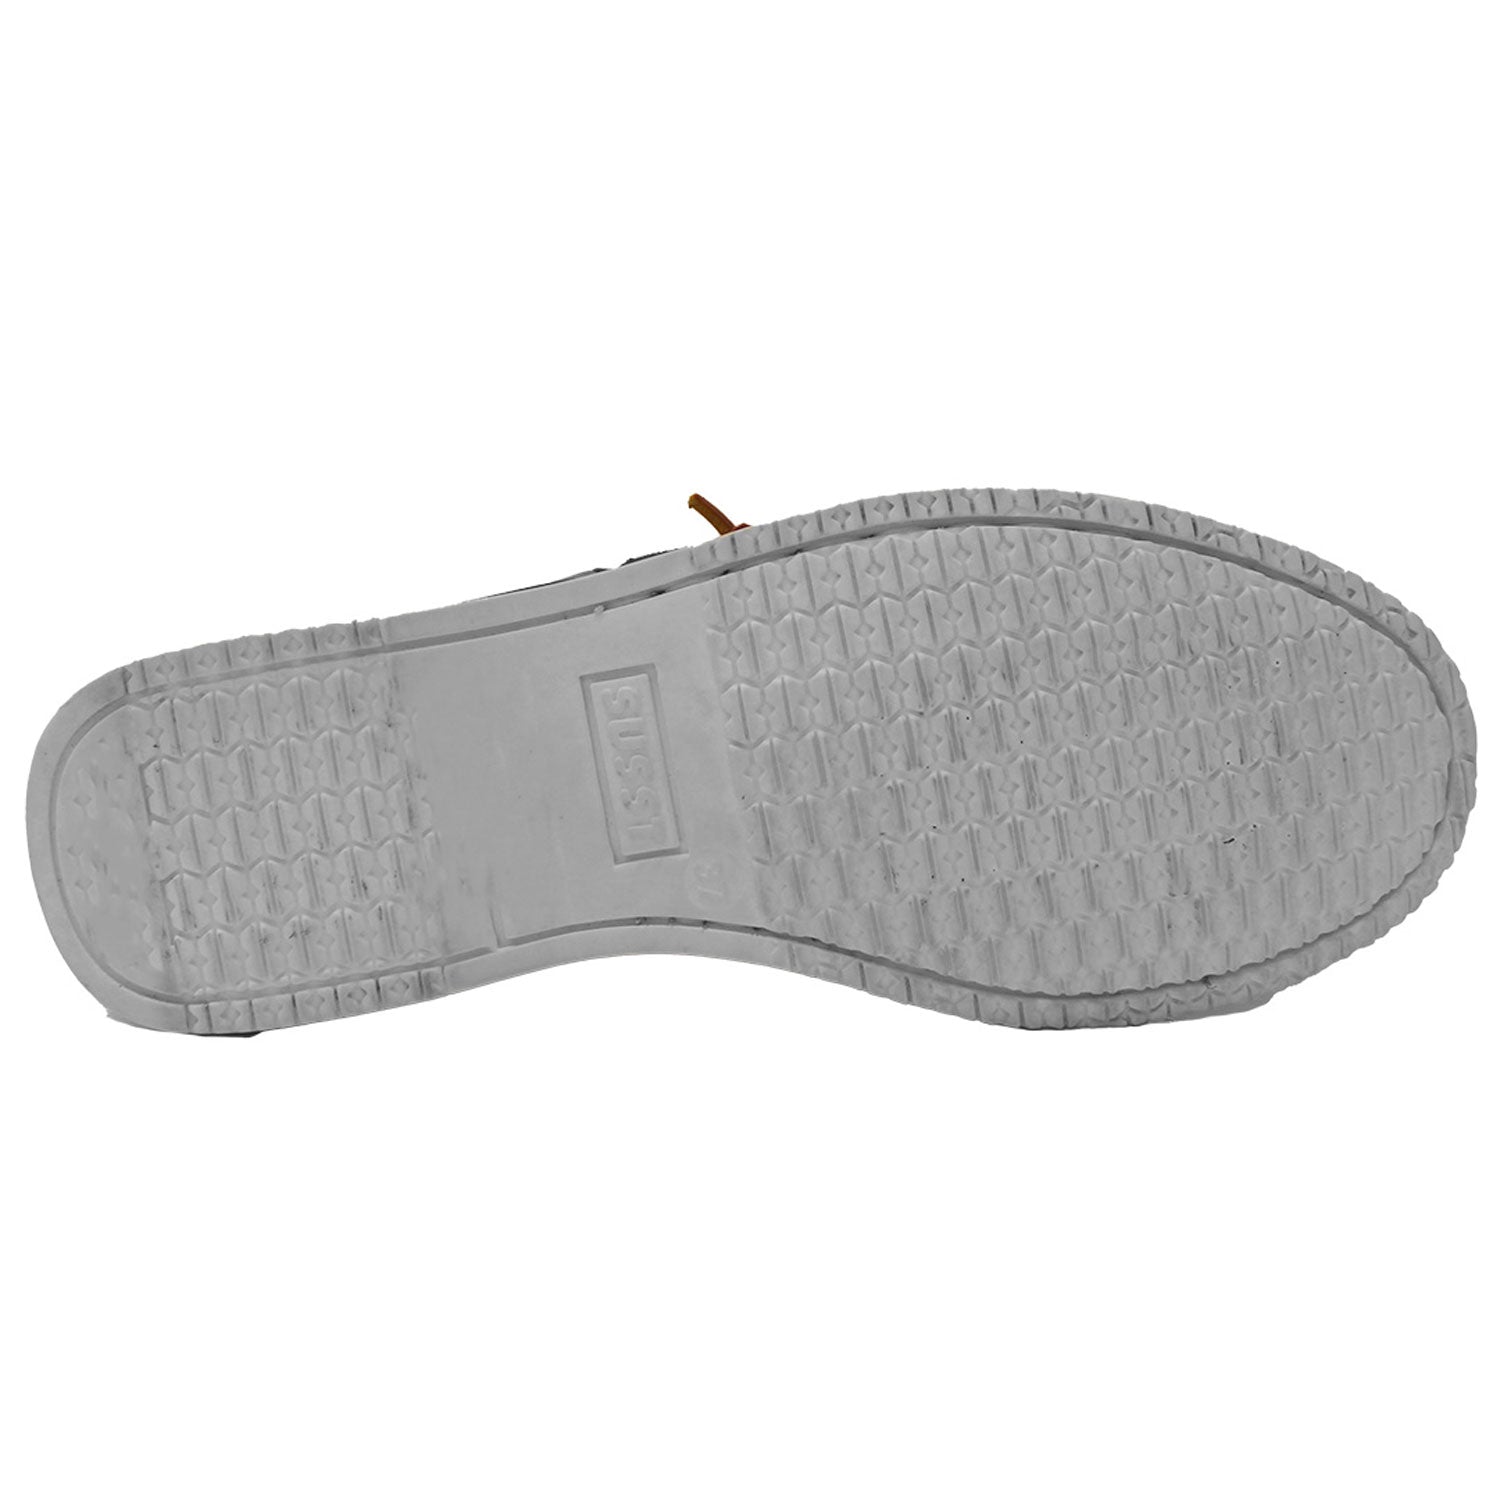 Susst Gaby Deck Shoe - Tan 2 Shaws Department Stores